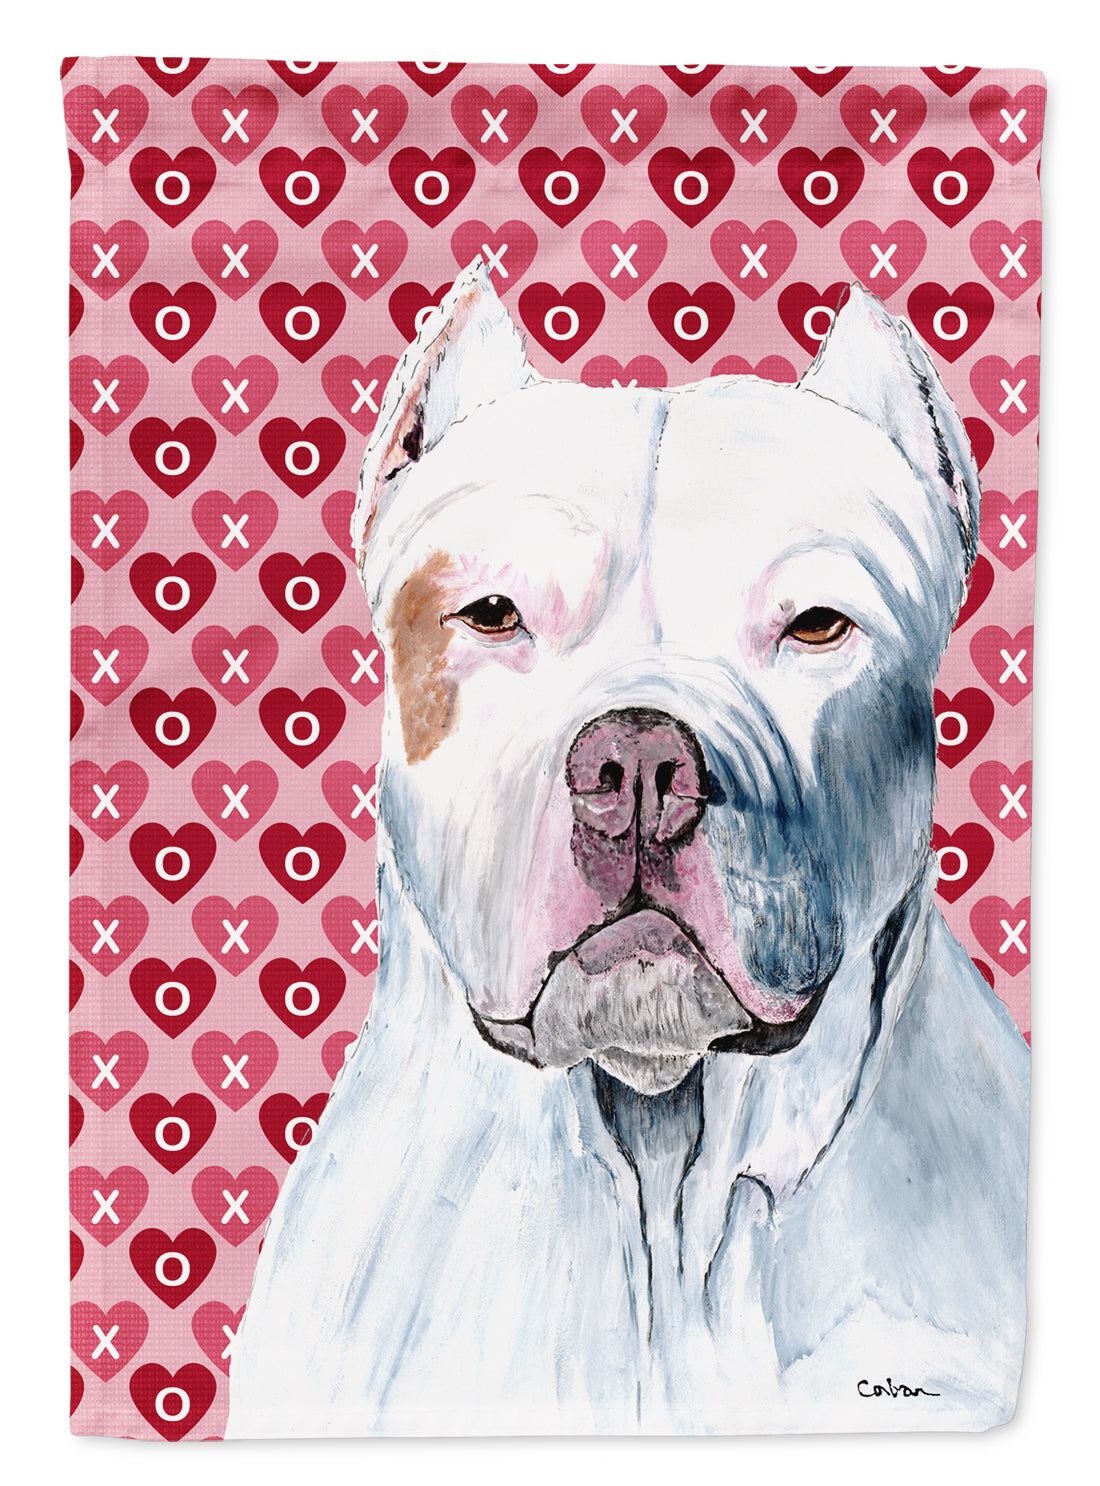 Pit Bull Hearts Love and Valentine's Day Portrait Flag Garden Size